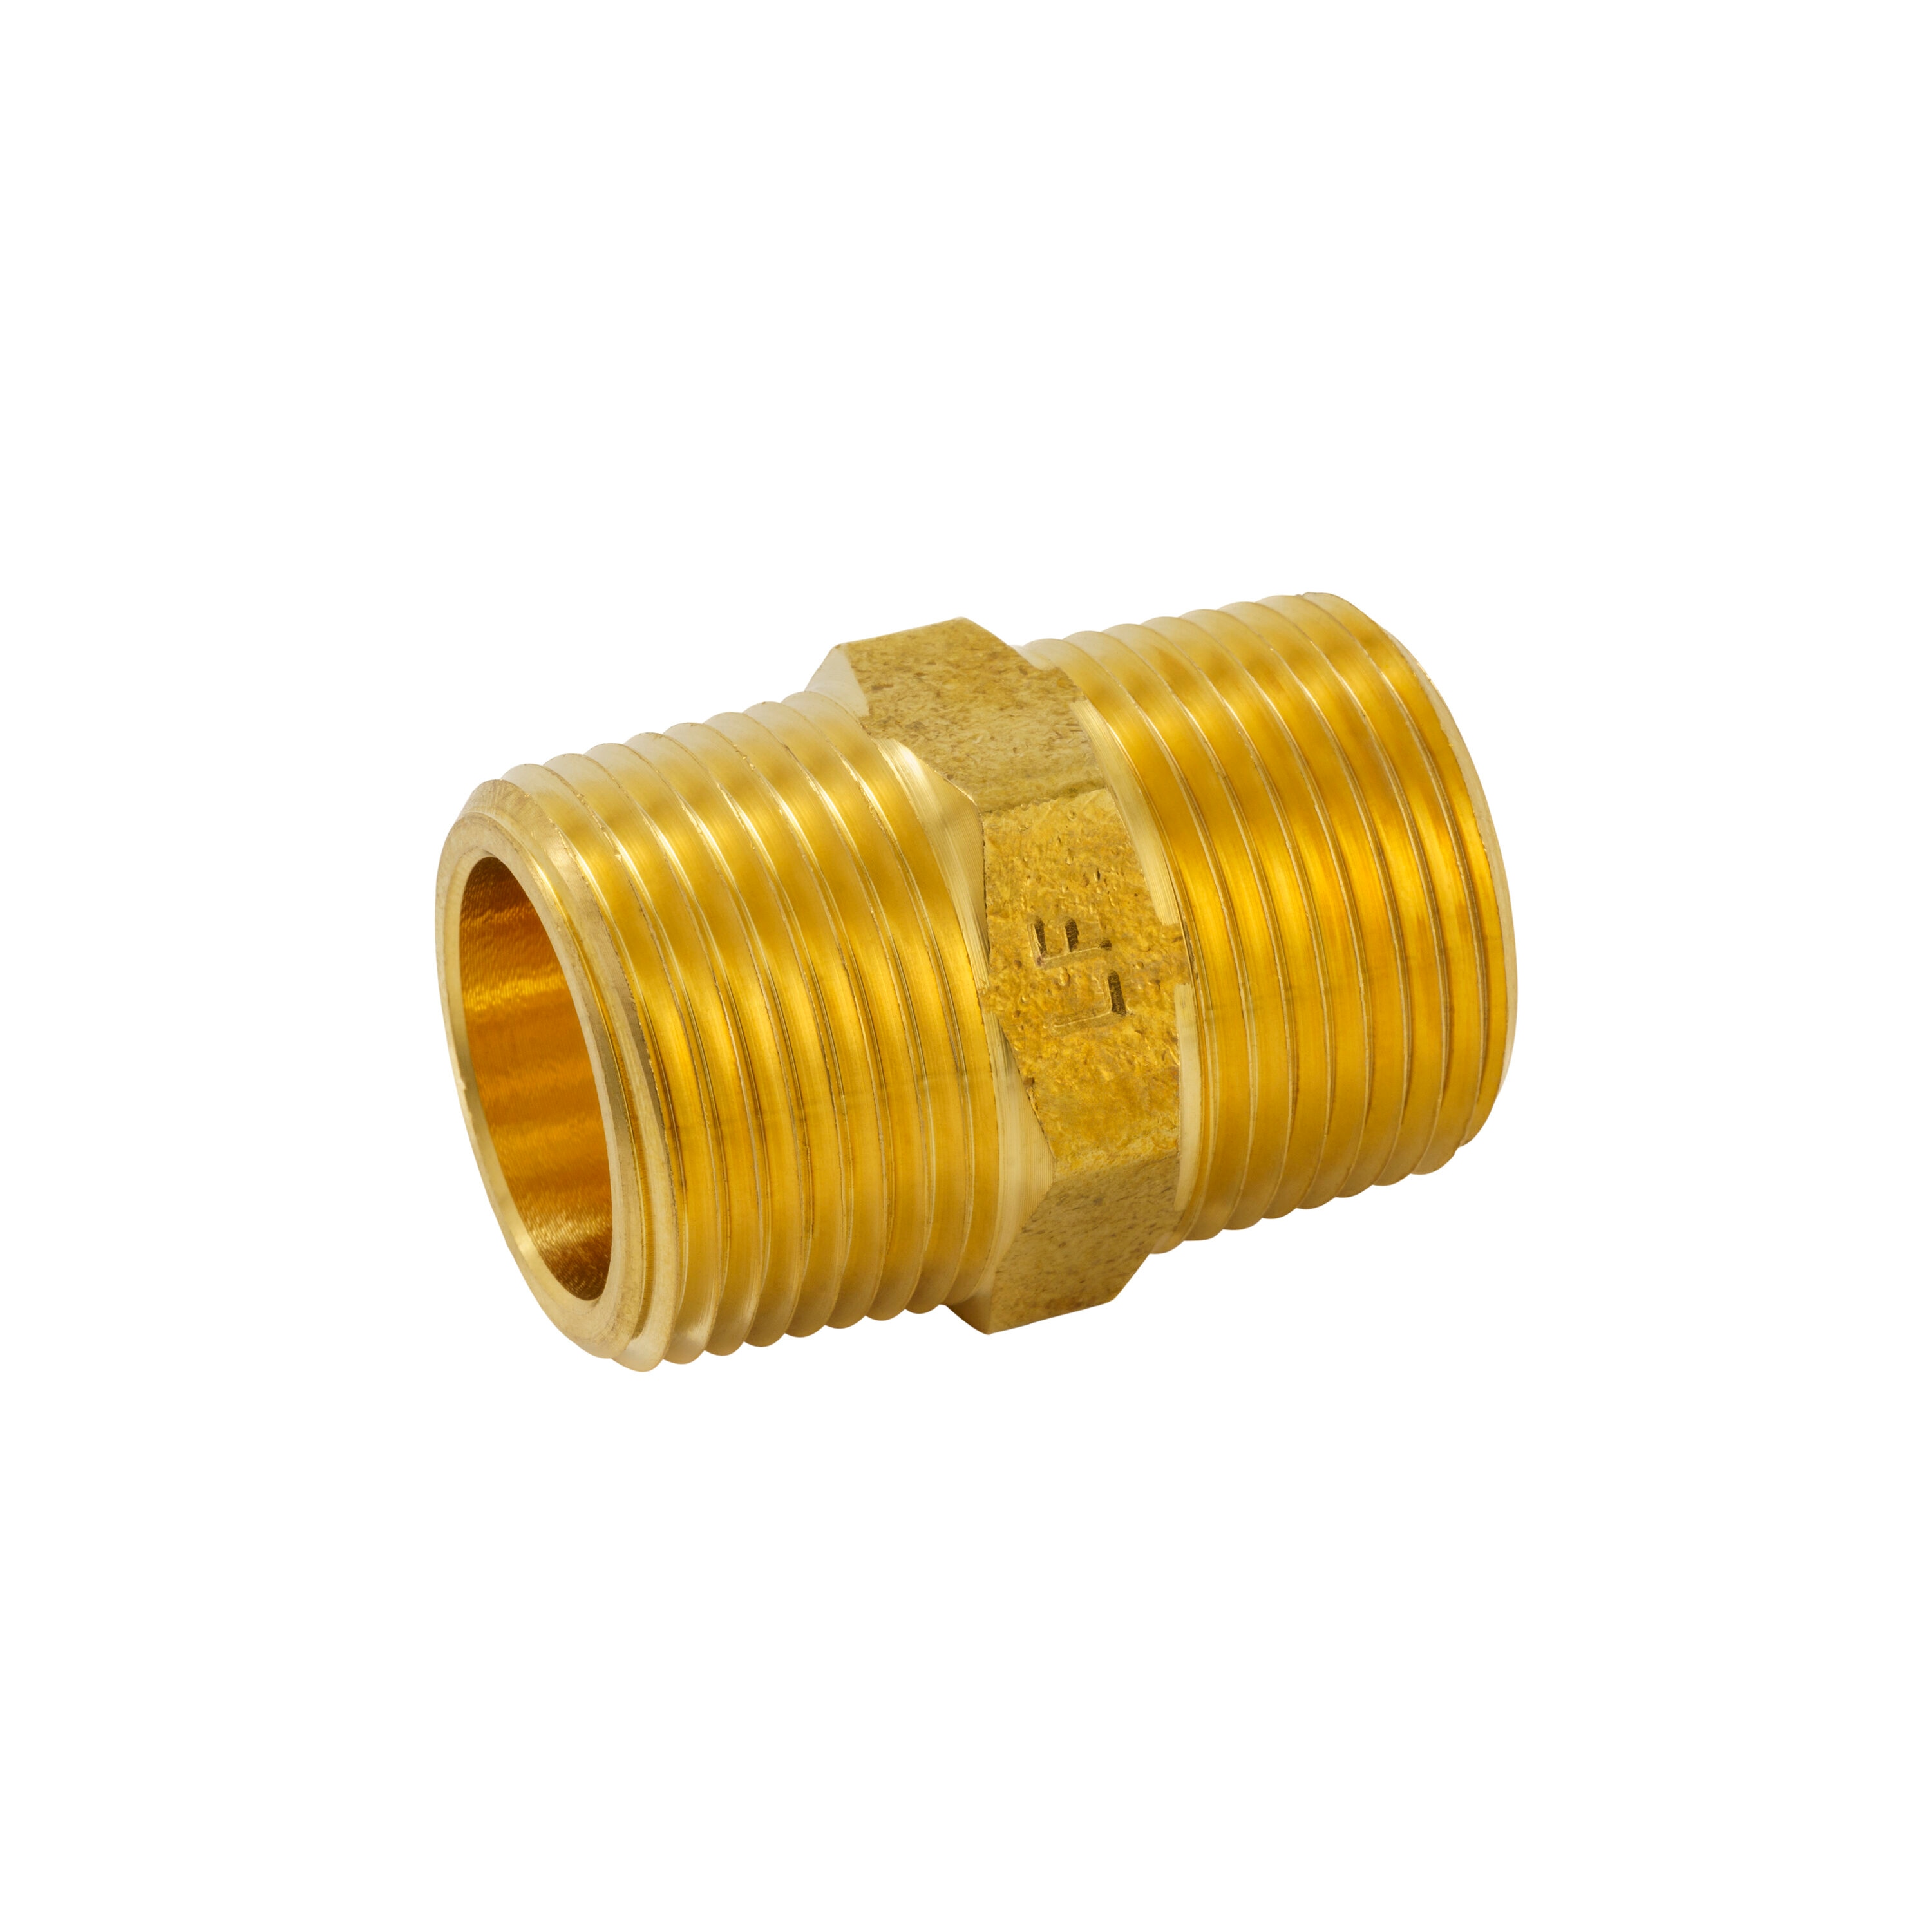 2pcs 90° Brass Elbow Connector 1/8 1/4 3/8 Pipe Fitting Female x